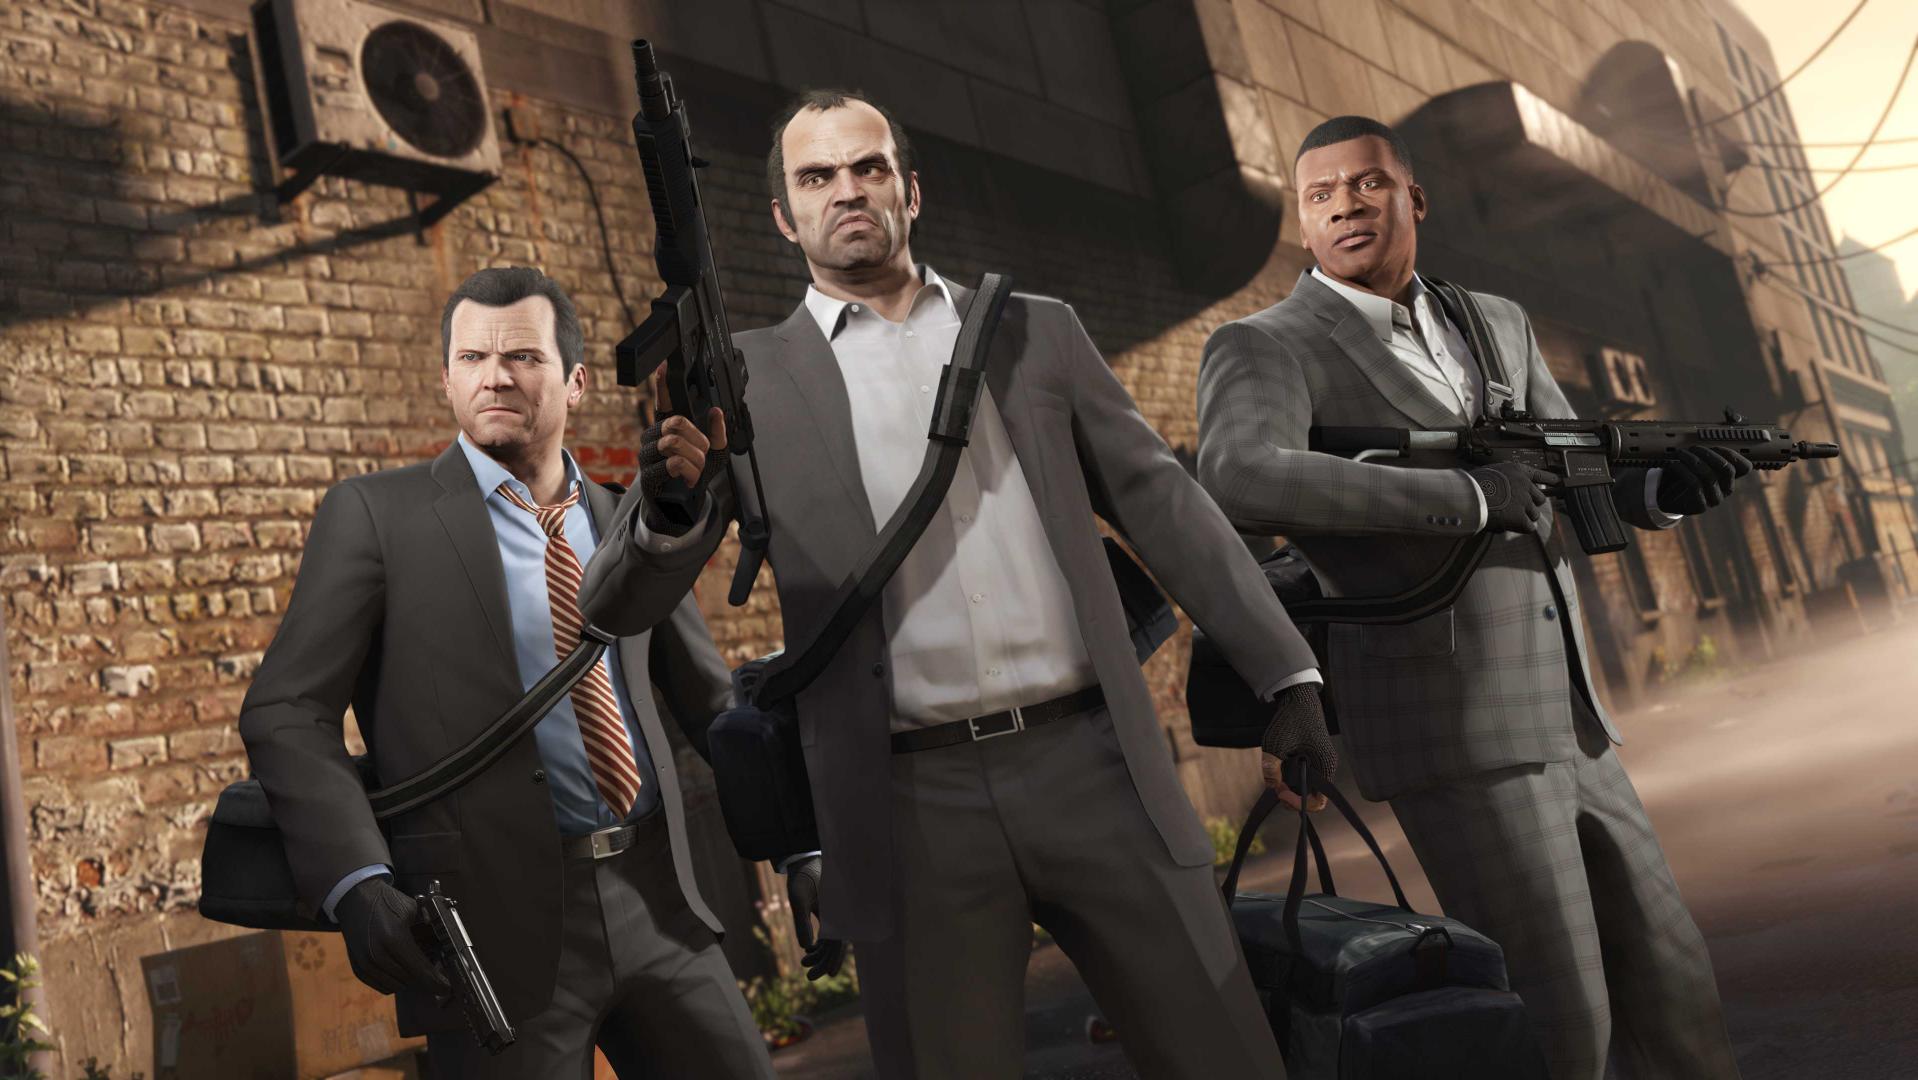 GTA 5 is the biggest hit in the franchise's history with over 150 million copies sold worldwide.